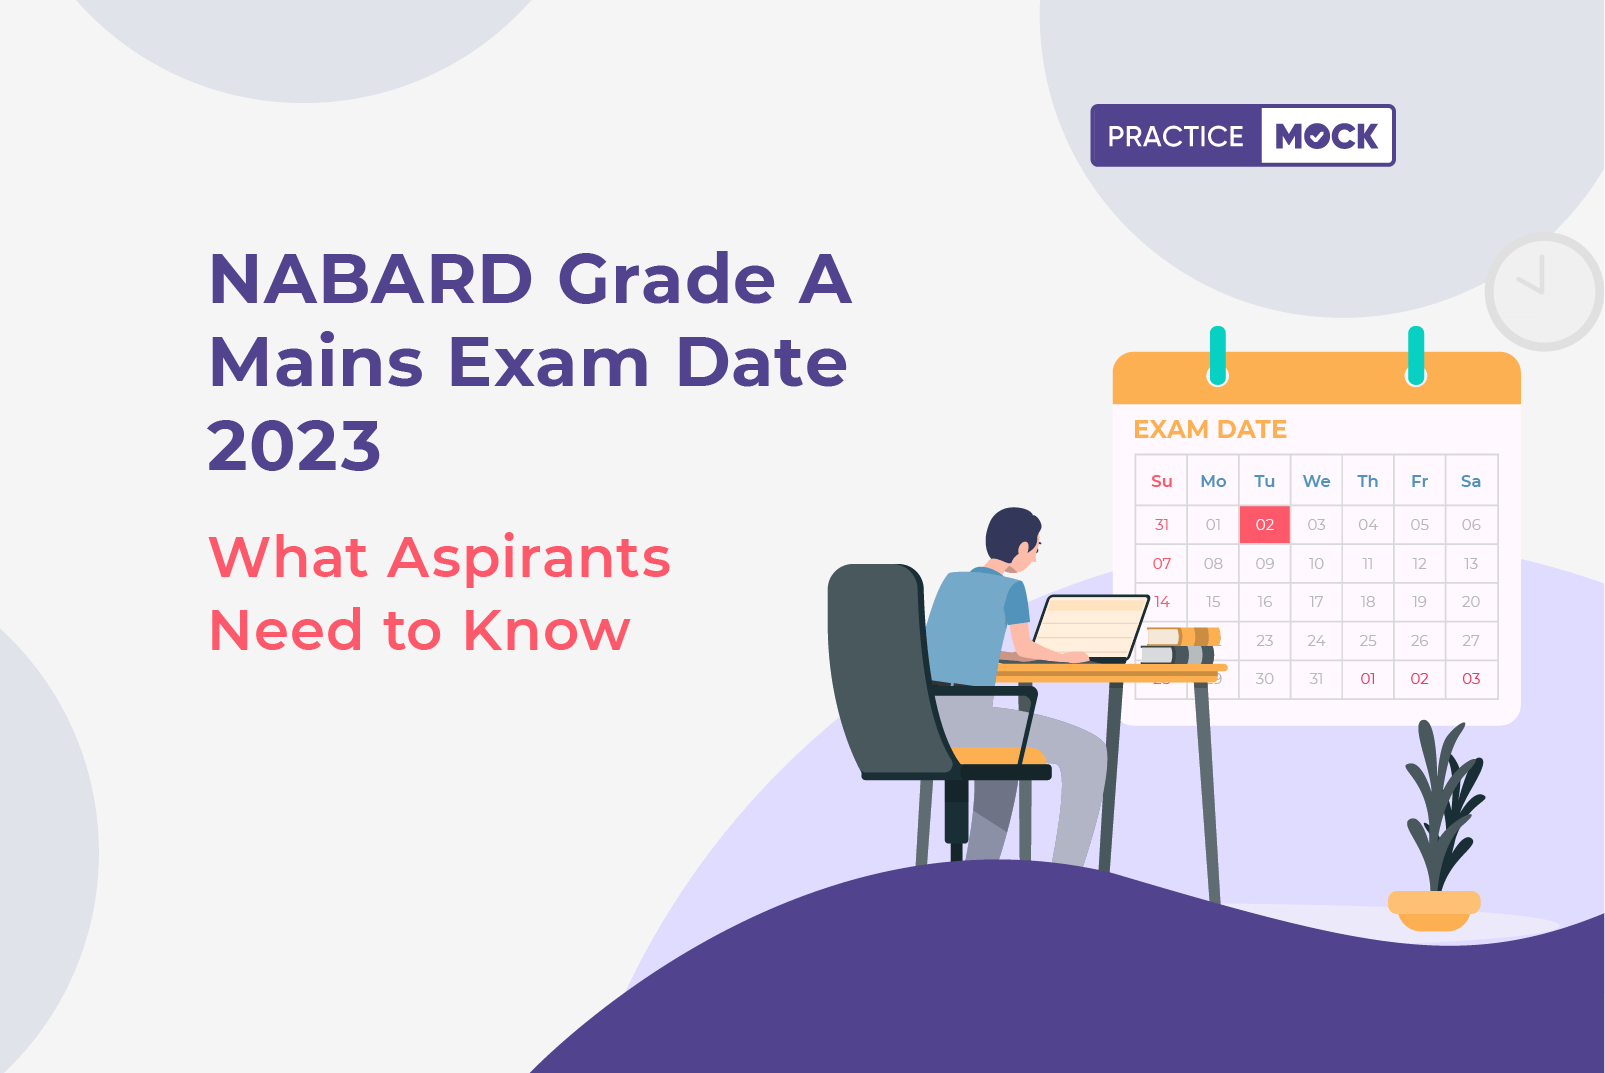 NABARD Grade A Mains Exam Date 2023 What Aspirants Need to Know